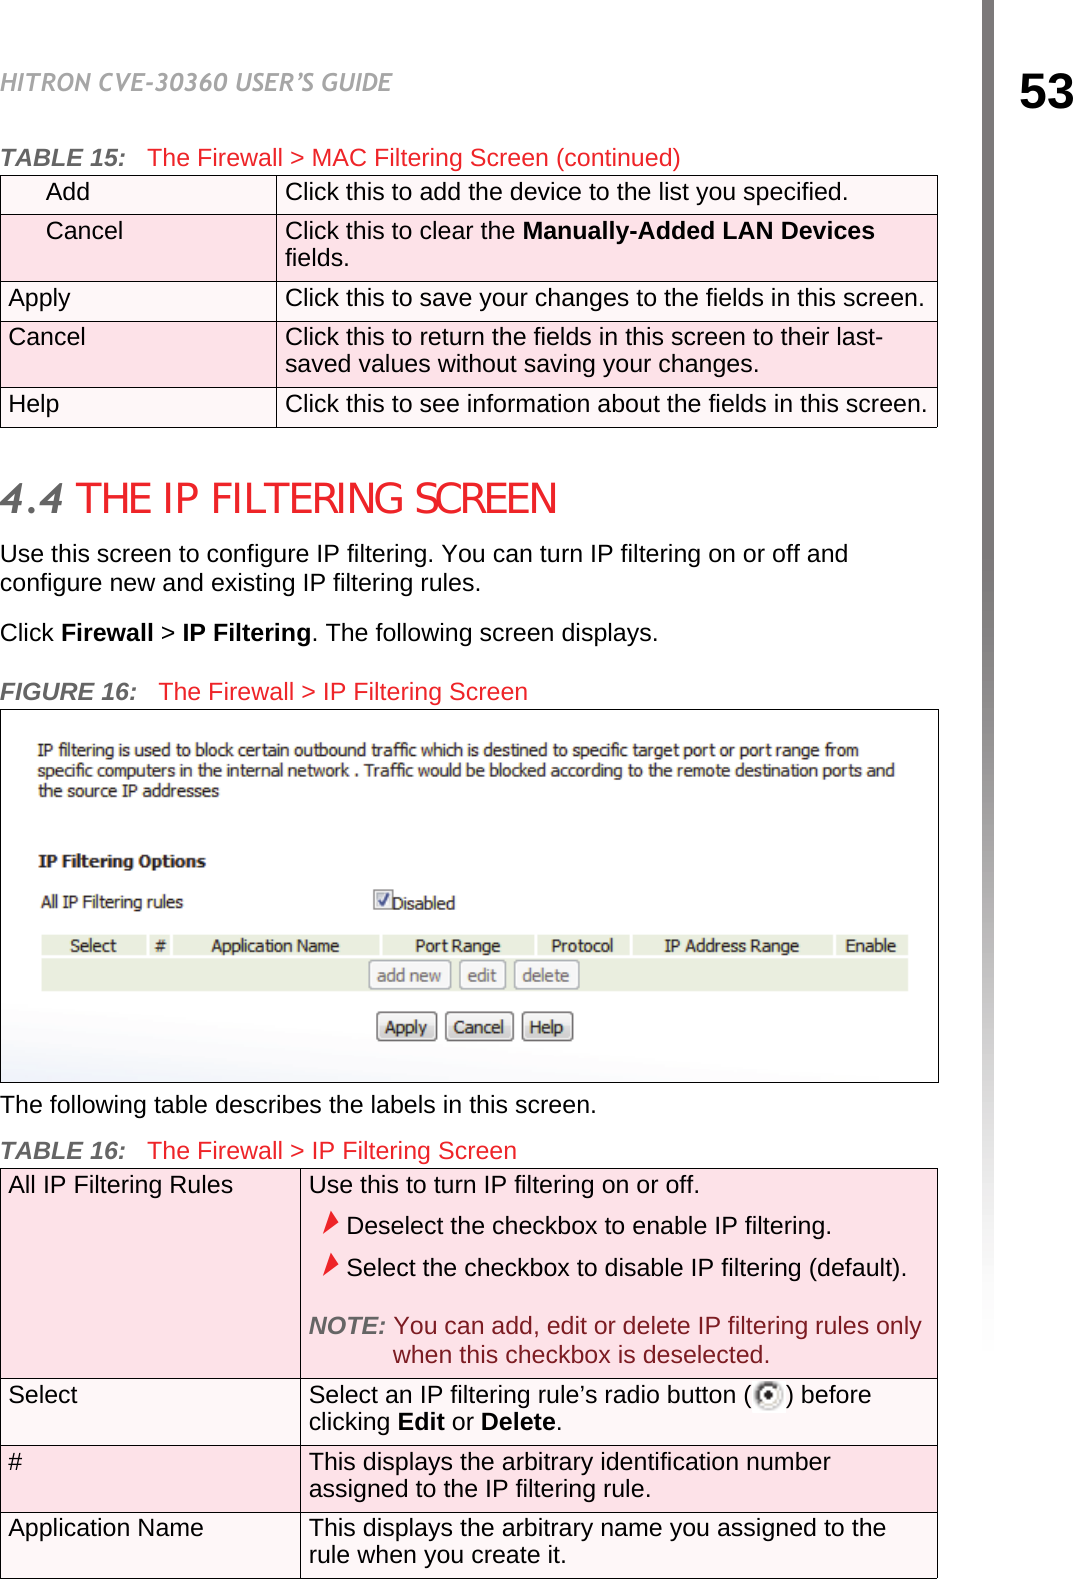 53HITRON CVE-30360 USER’S GUIDEFIREWALL4.4 THE IP FILTERING SCREENUse this screen to configure IP filtering. You can turn IP filtering on or off and configure new and existing IP filtering rules.Click Firewall &gt; IP Filtering. The following screen displays.FIGURE 16:   The Firewall &gt; IP Filtering ScreenThe following table describes the labels in this screen.Add Click this to add the device to the list you specified.Cancel Click this to clear the Manually-Added LAN Devices fields.Apply Click this to save your changes to the fields in this screen.Cancel Click this to return the fields in this screen to their last-saved values without saving your changes.Help Click this to see information about the fields in this screen.TABLE 16:   The Firewall &gt; IP Filtering Screen All IP Filtering Rules Use this to turn IP filtering on or off.Deselect the checkbox to enable IP filtering.Select the checkbox to disable IP filtering (default).NOTE: You can add, edit or delete IP filtering rules only when this checkbox is deselected.Select Select an IP filtering rule’s radio button ( ) before clicking Edit or Delete.#This displays the arbitrary identification number assigned to the IP filtering rule.Application Name This displays the arbitrary name you assigned to the rule when you create it.TABLE 15:   The Firewall &gt; MAC Filtering Screen (continued)